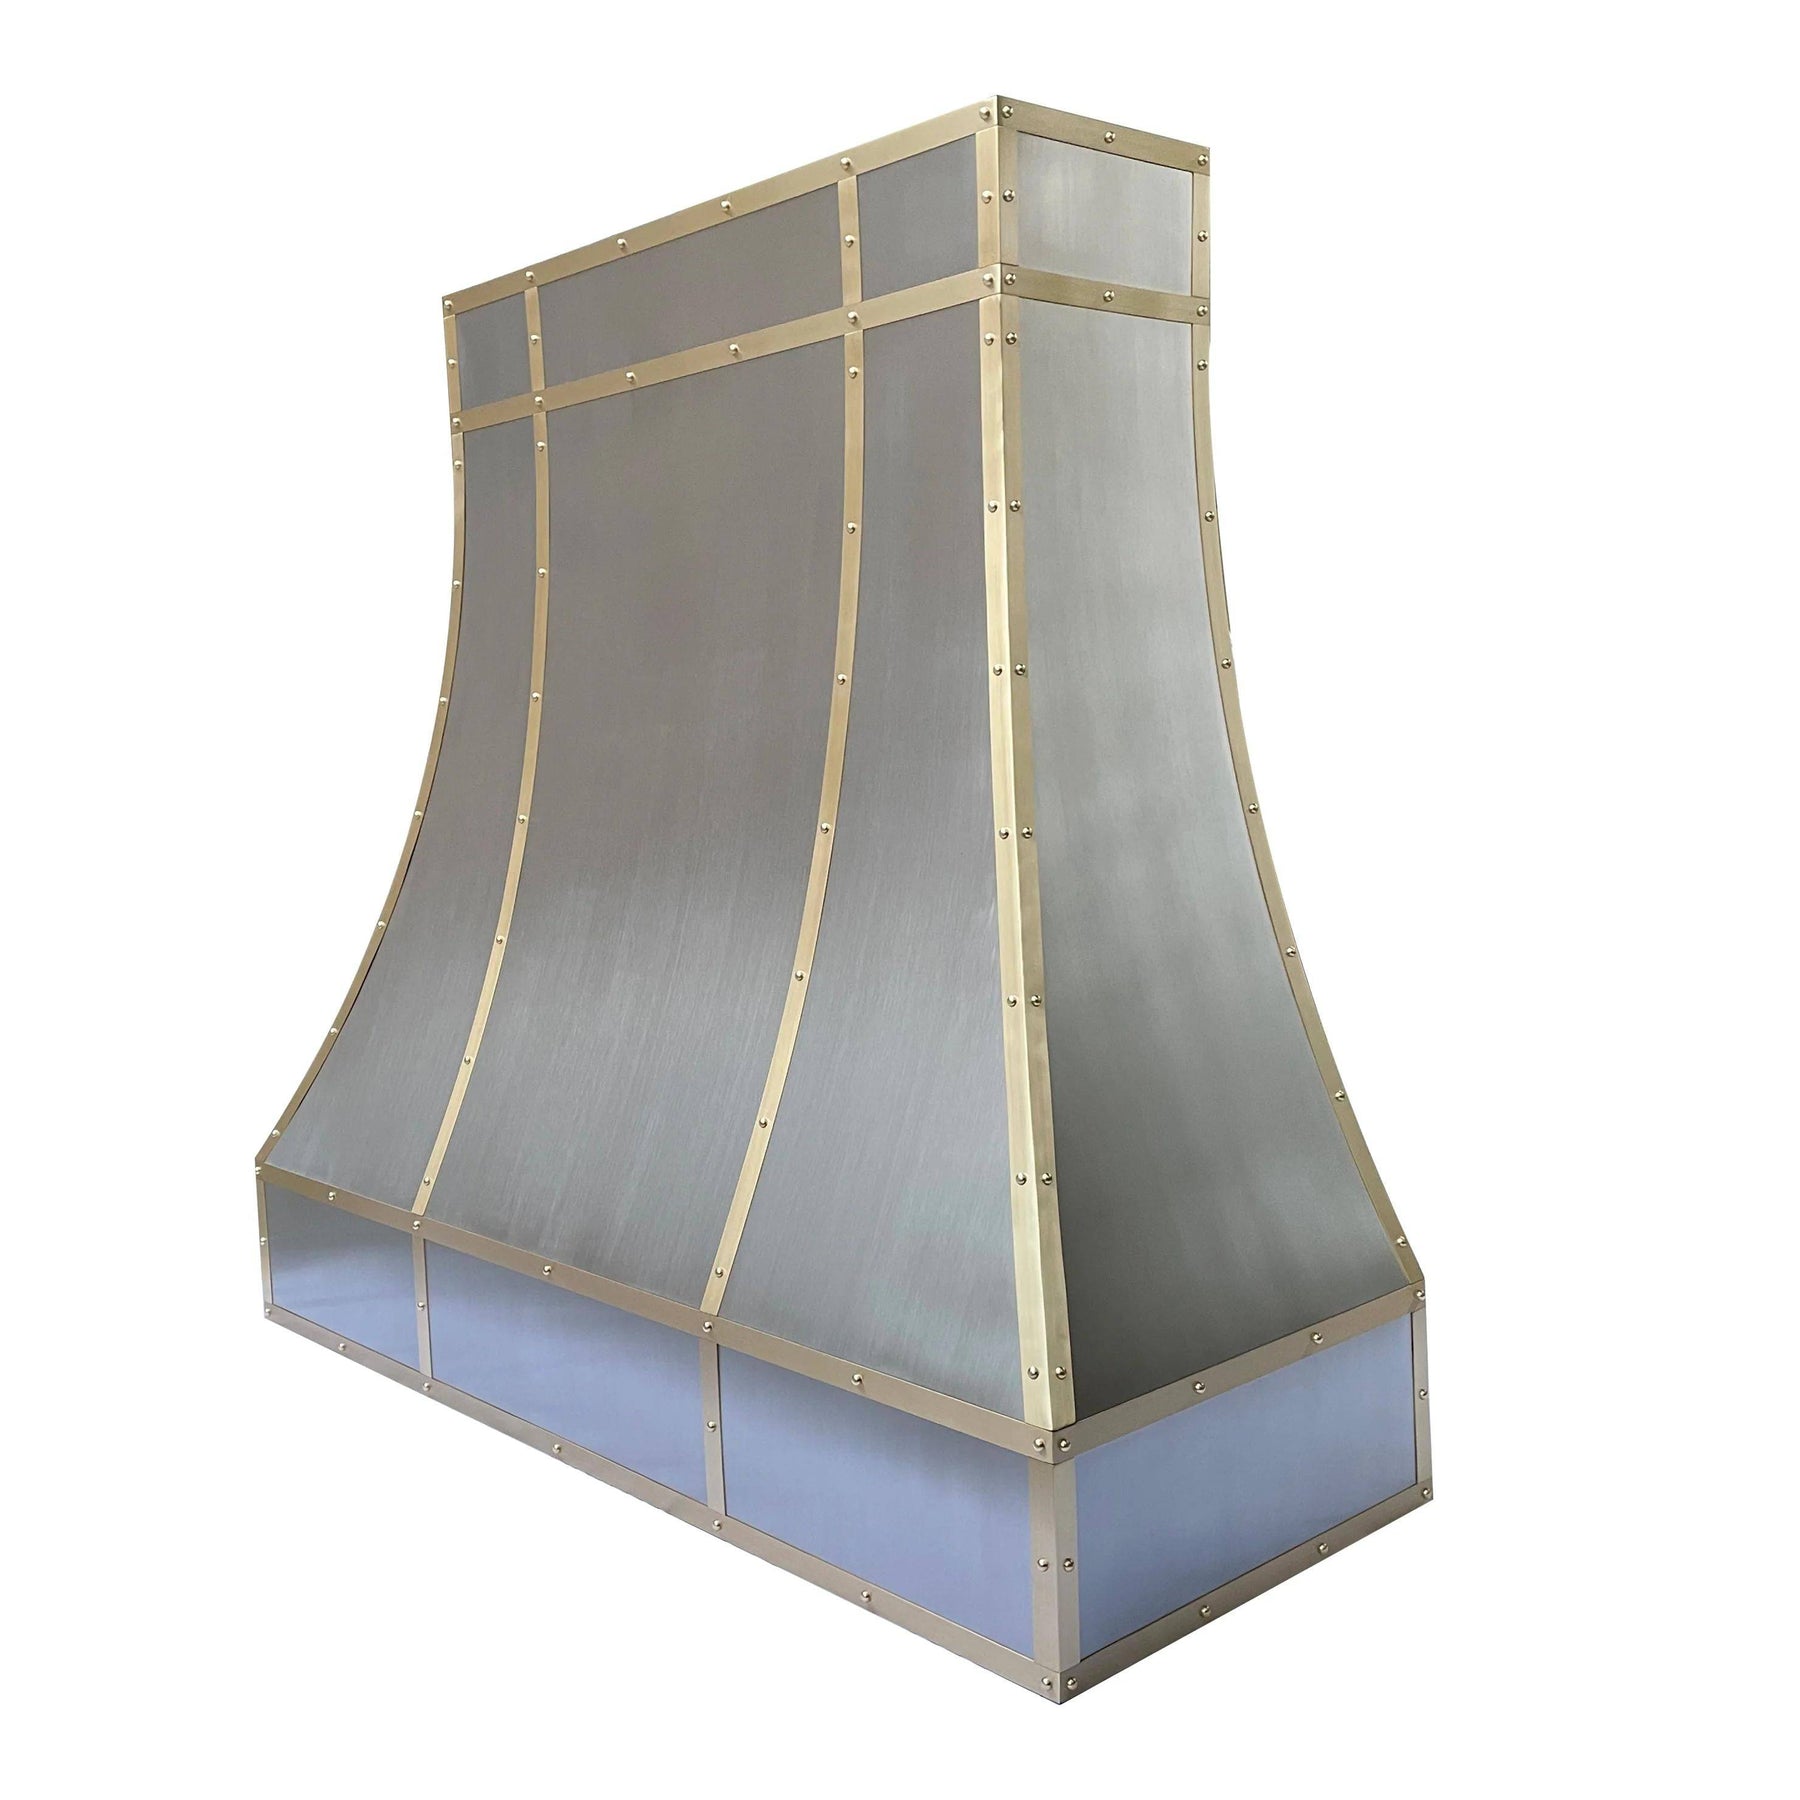 Fobest Handcrafted Brushed Stainless Steel Range Hood with Brass Straps FSS-84 - Stainless Steel Range Hood-Fobest Appliance